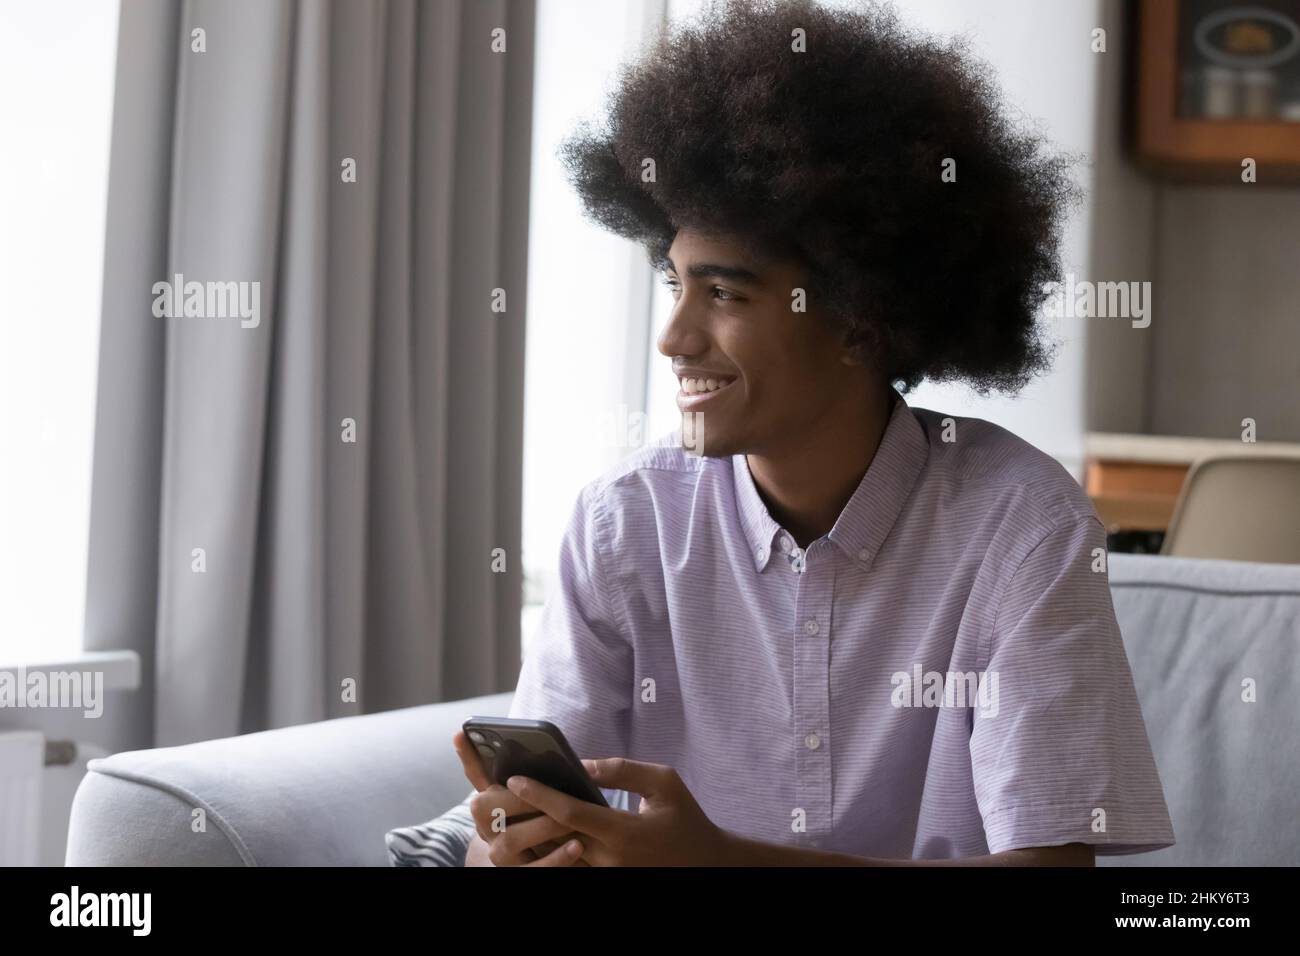 Happy teenage fuzzy haired African guy holding digital gadget Stock Photo